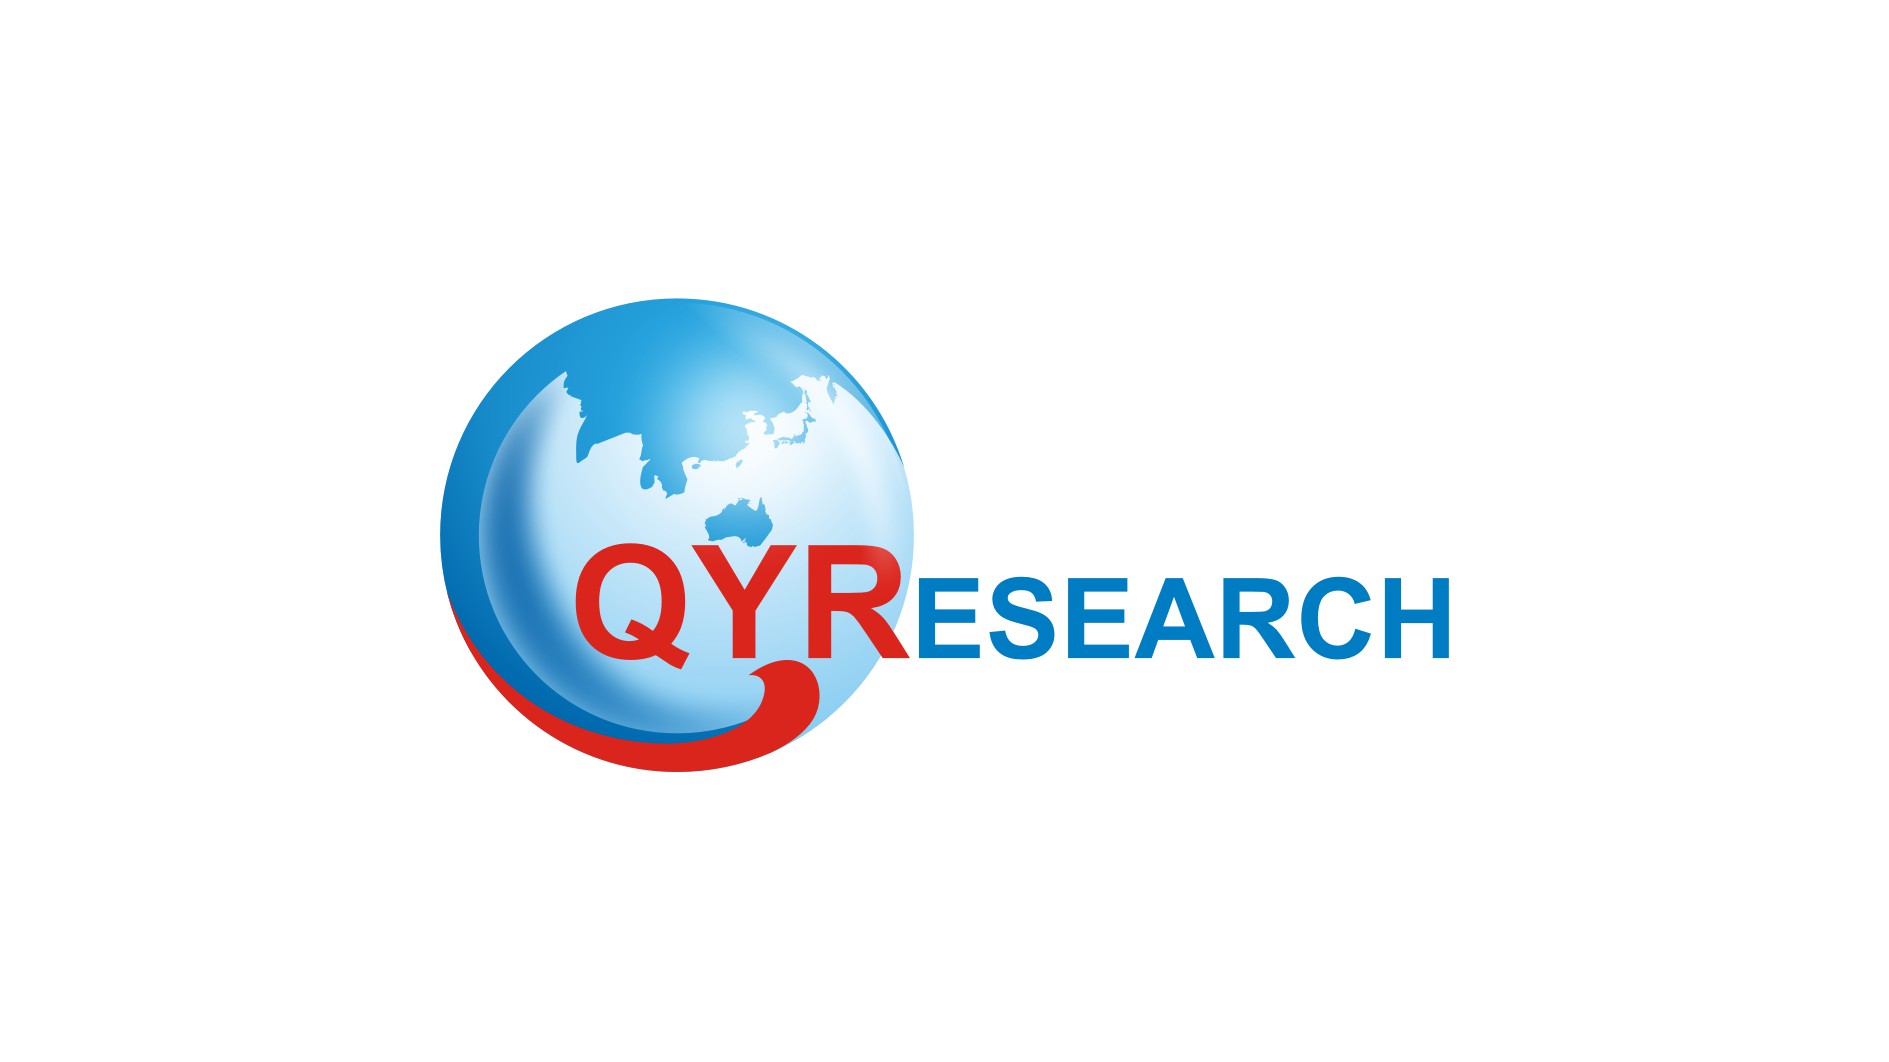 Bentonite Market Overview by 2025: QY Research